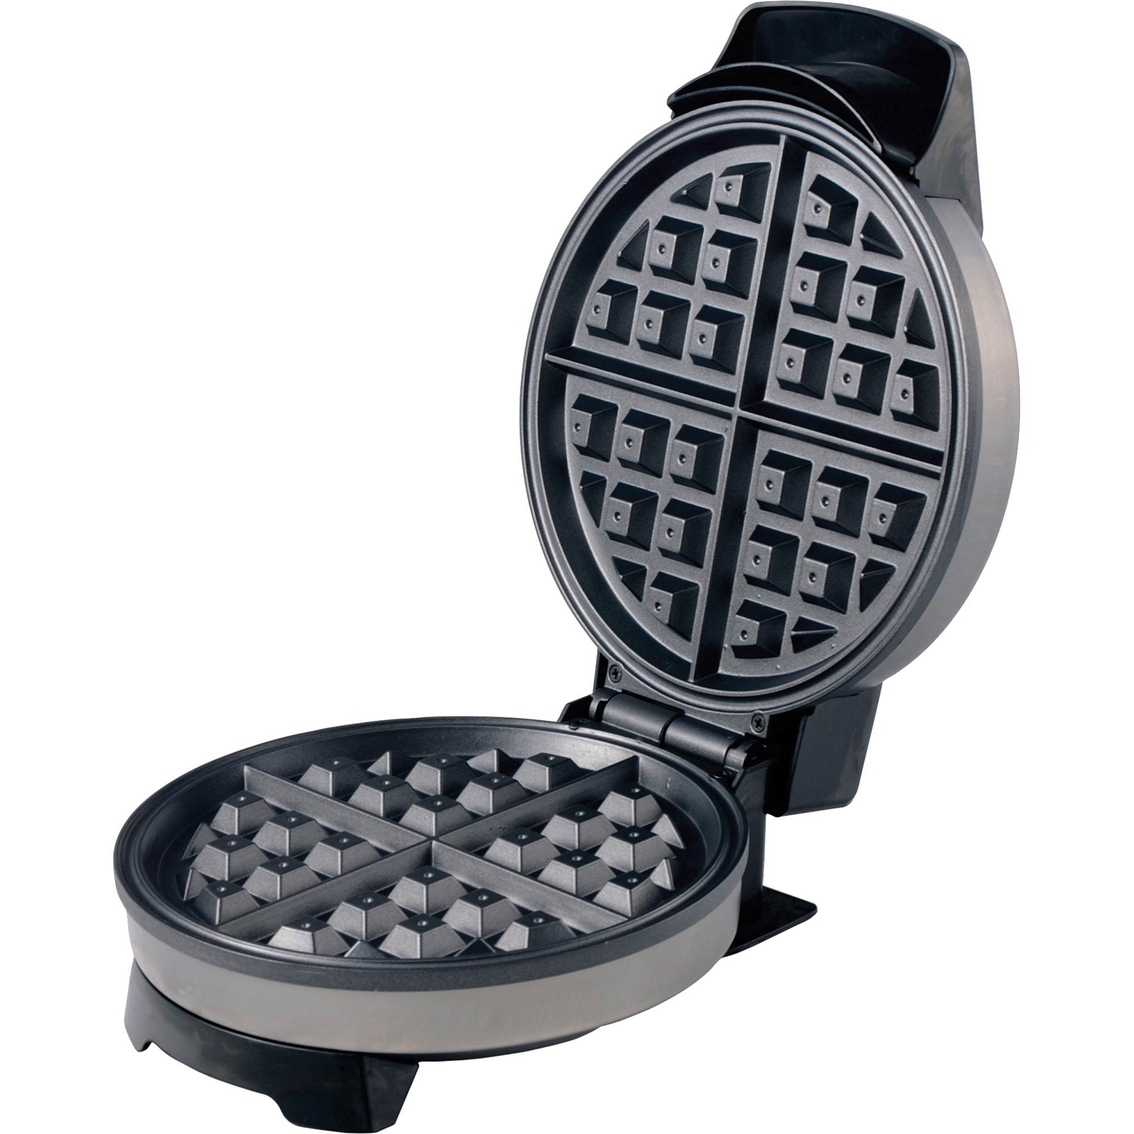 Brentwood 7 in. Nonstick Belgian Waffle Maker - Image 3 of 4